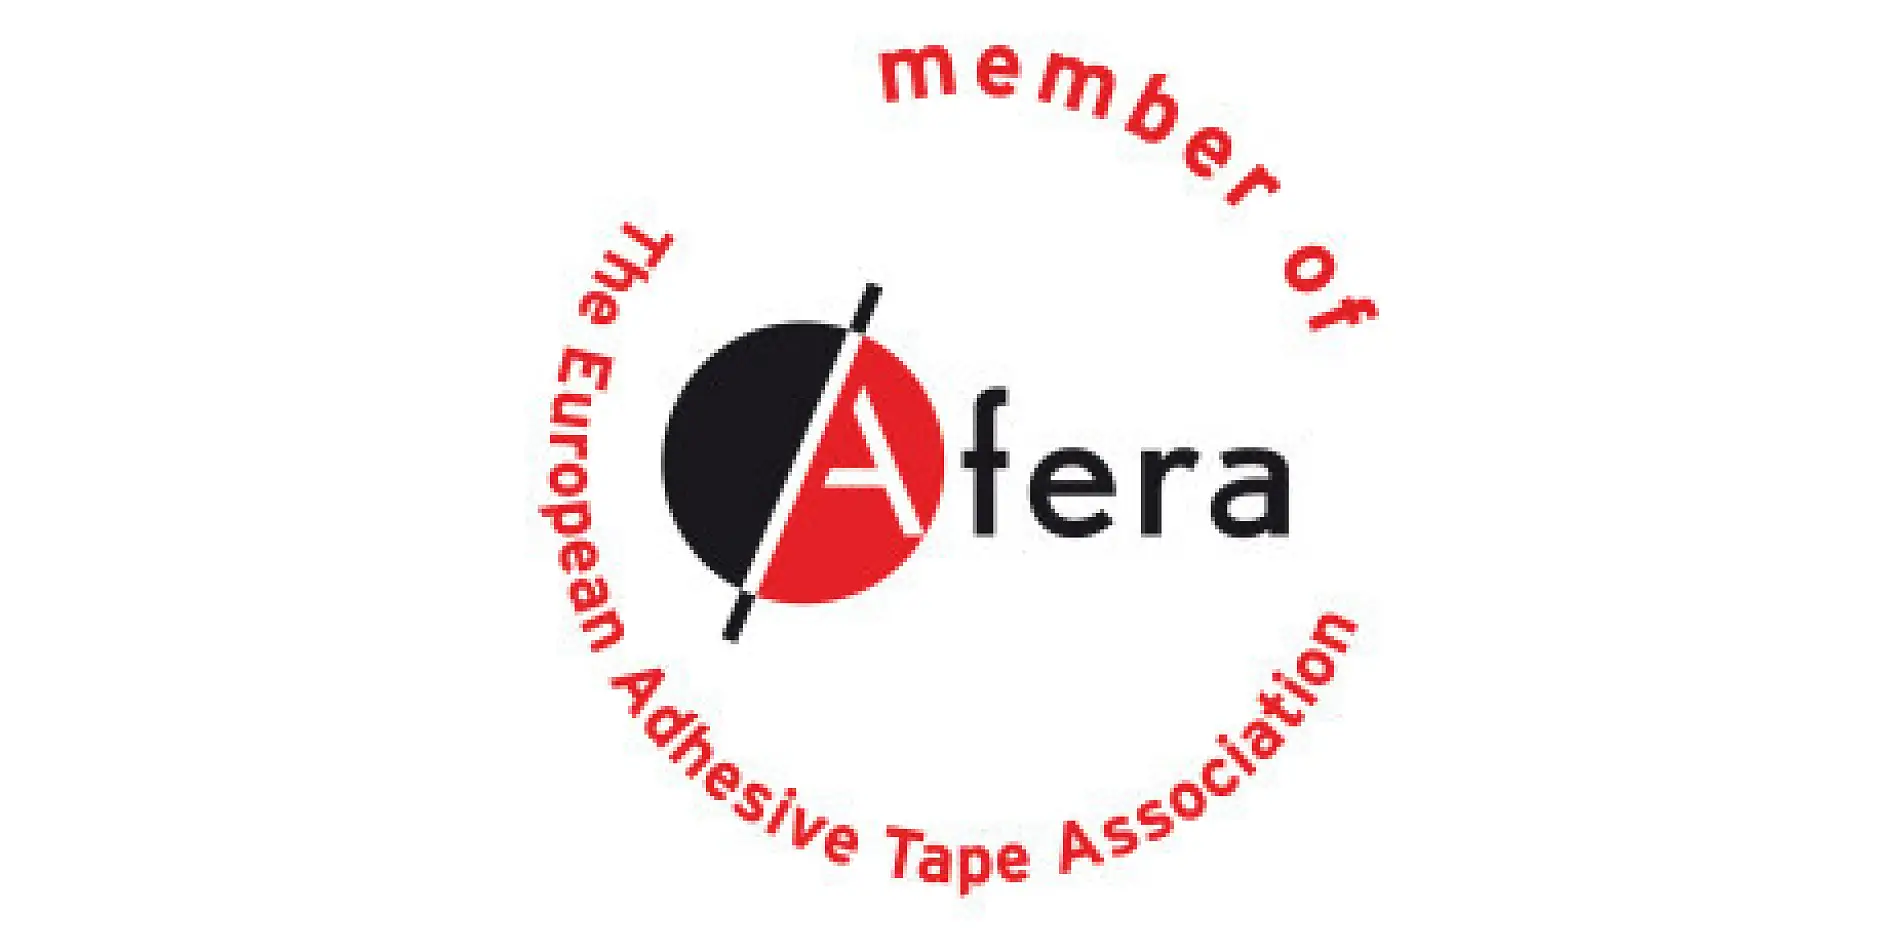 tesa is member of afera - the European Adhesive Tape Association. The membership includes manufacturers, raw materials and machine suppliers, converters (such as printers, slitters, die cutters and laminators of adhesive tape), and national tape organisations.